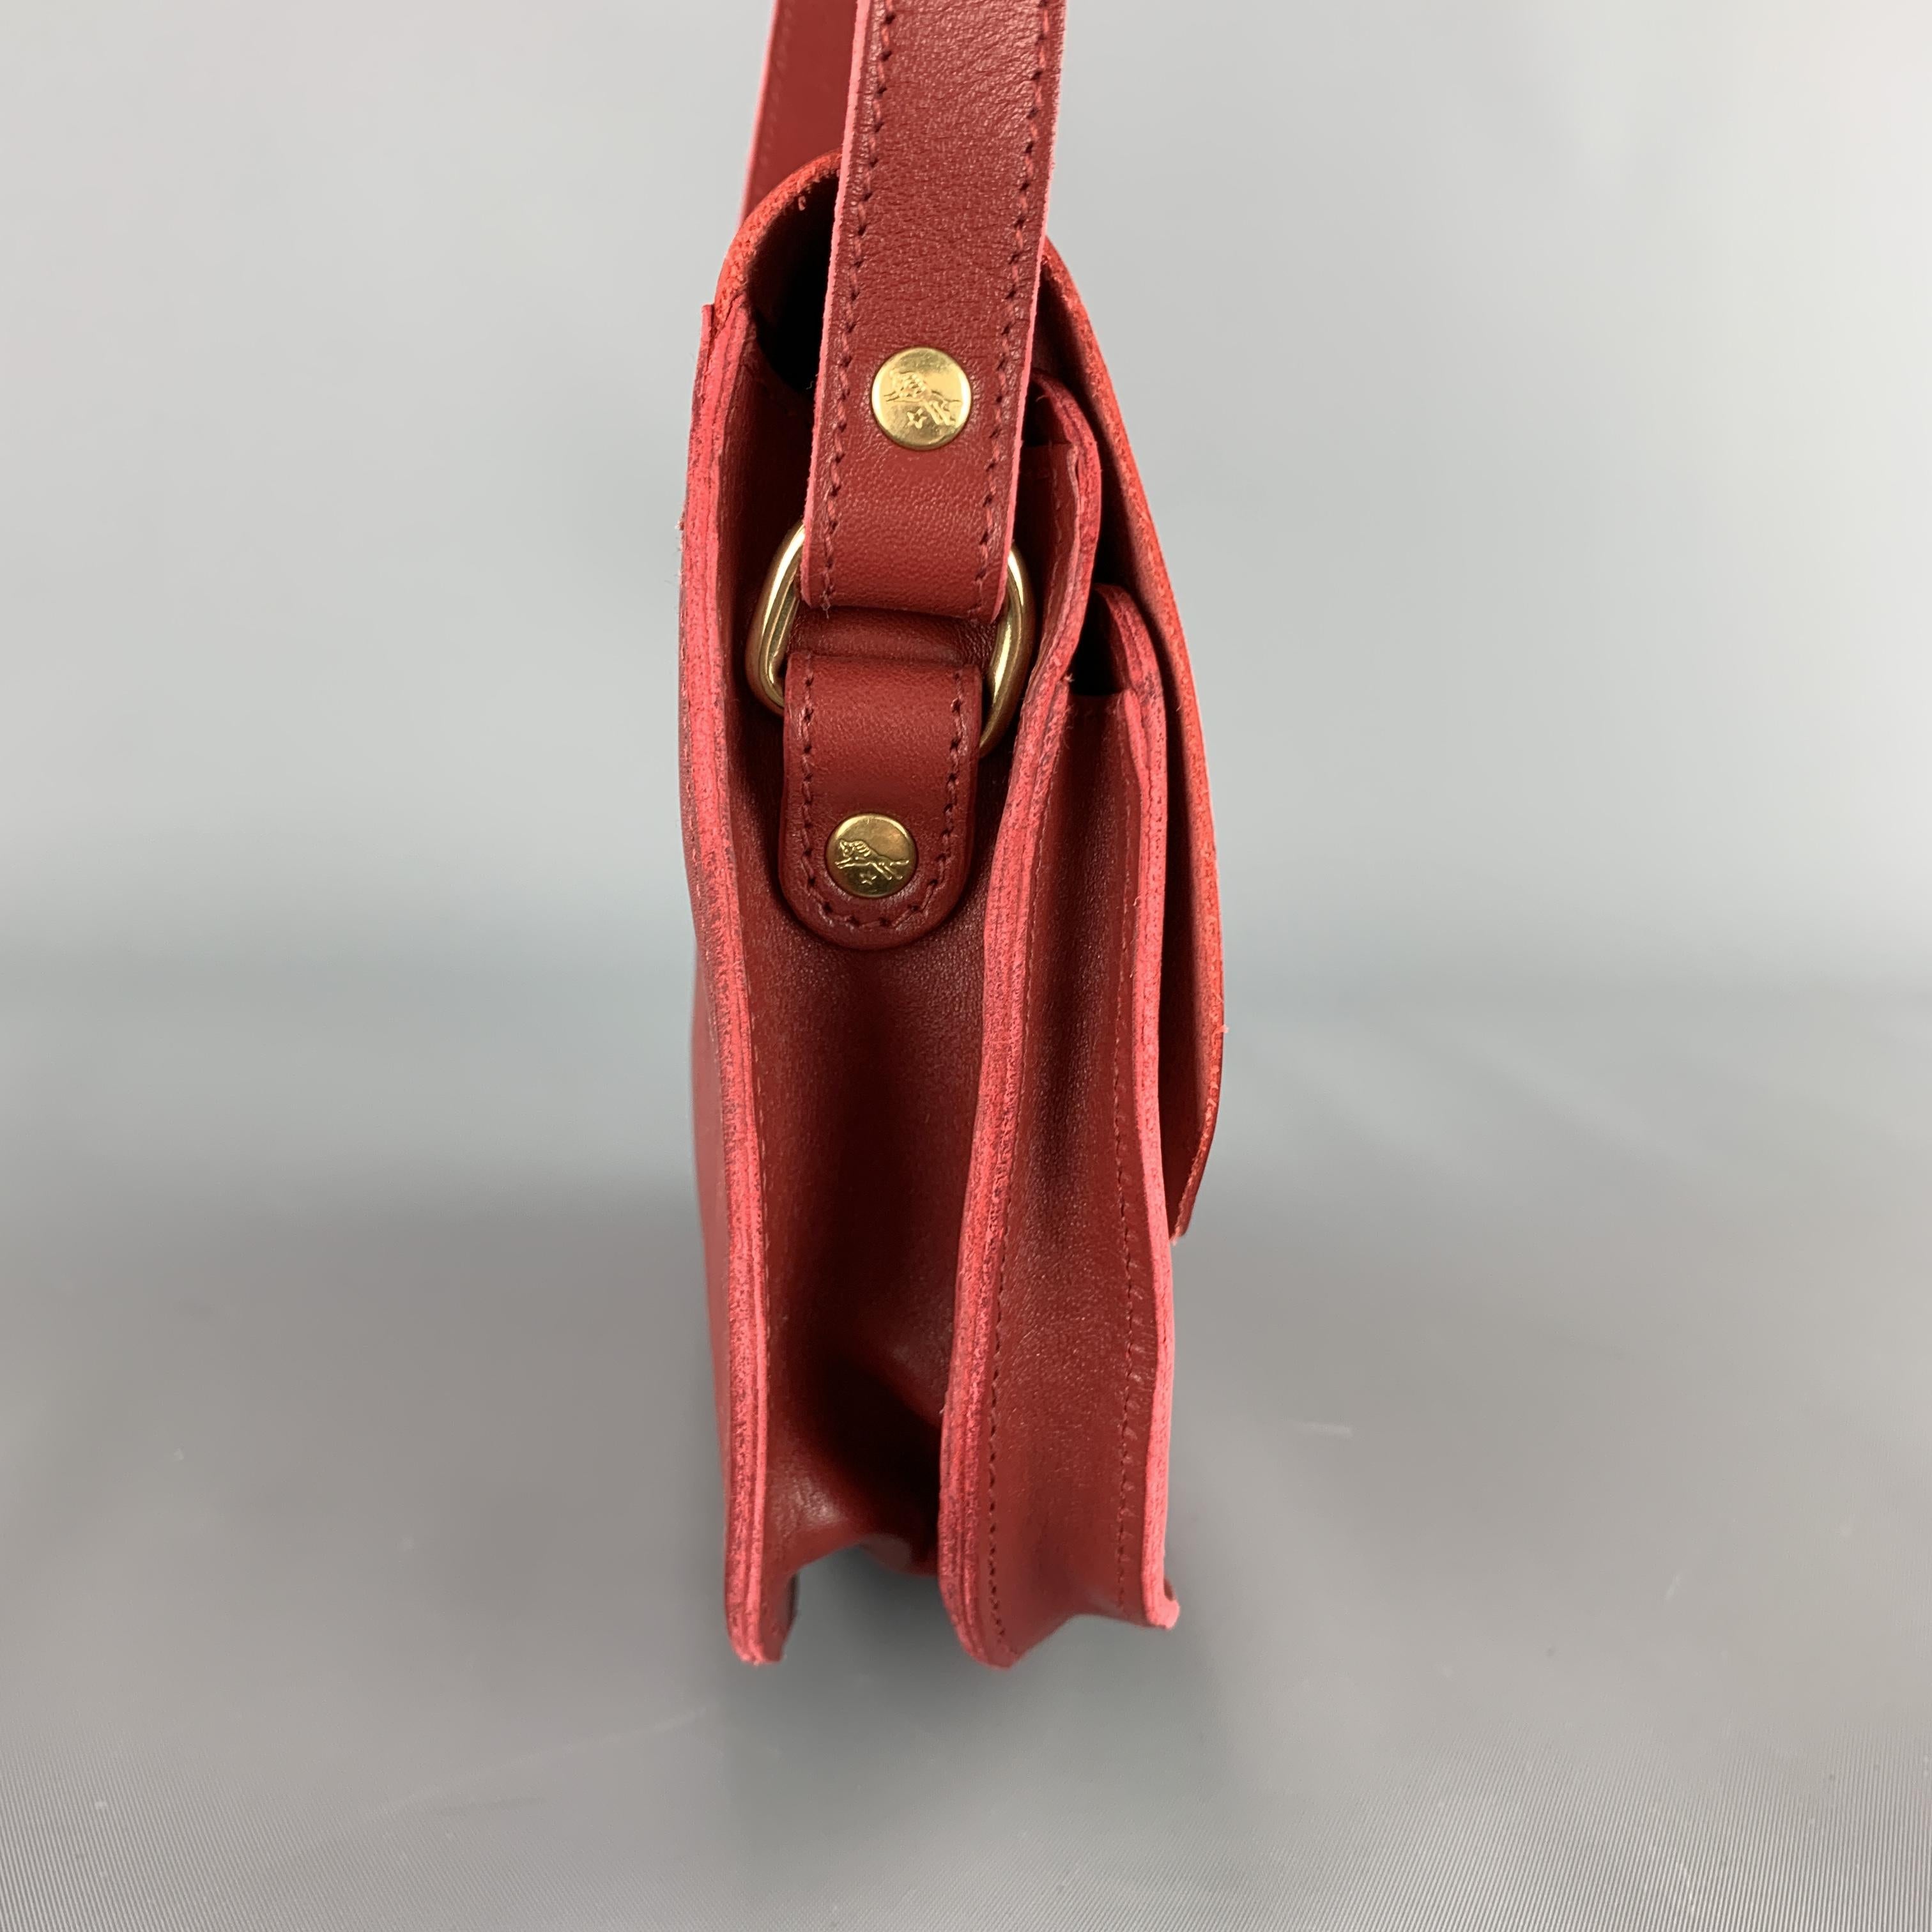 Women's IL BISONTE Red Leather cLASSIC Saddle Cross Body Handbag